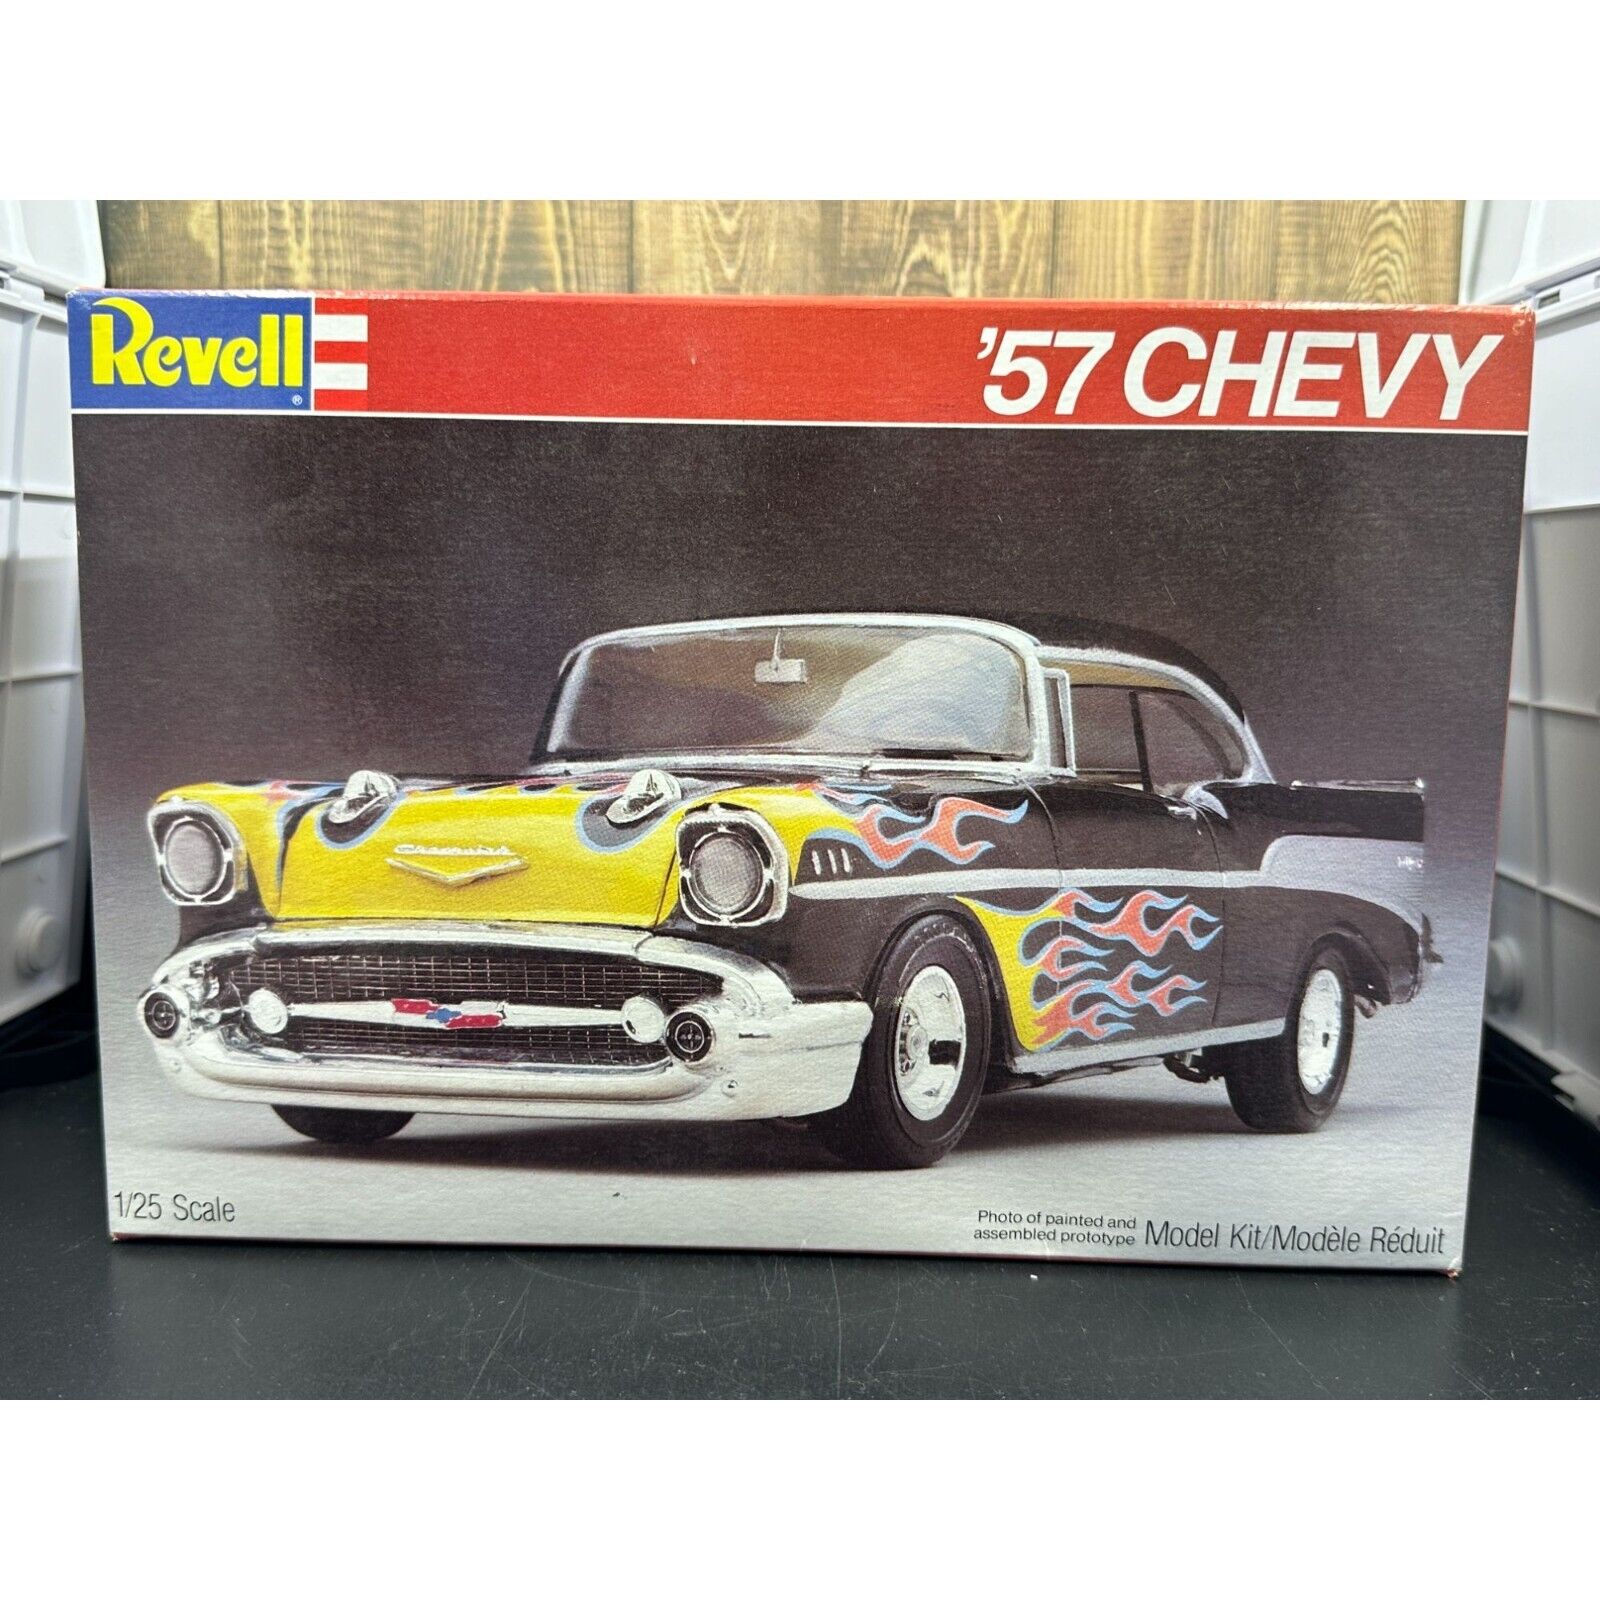 Vintage 1983 Revell \'57 Chevy 1/25 Scale Model Kit 7383 Complete Unassembled